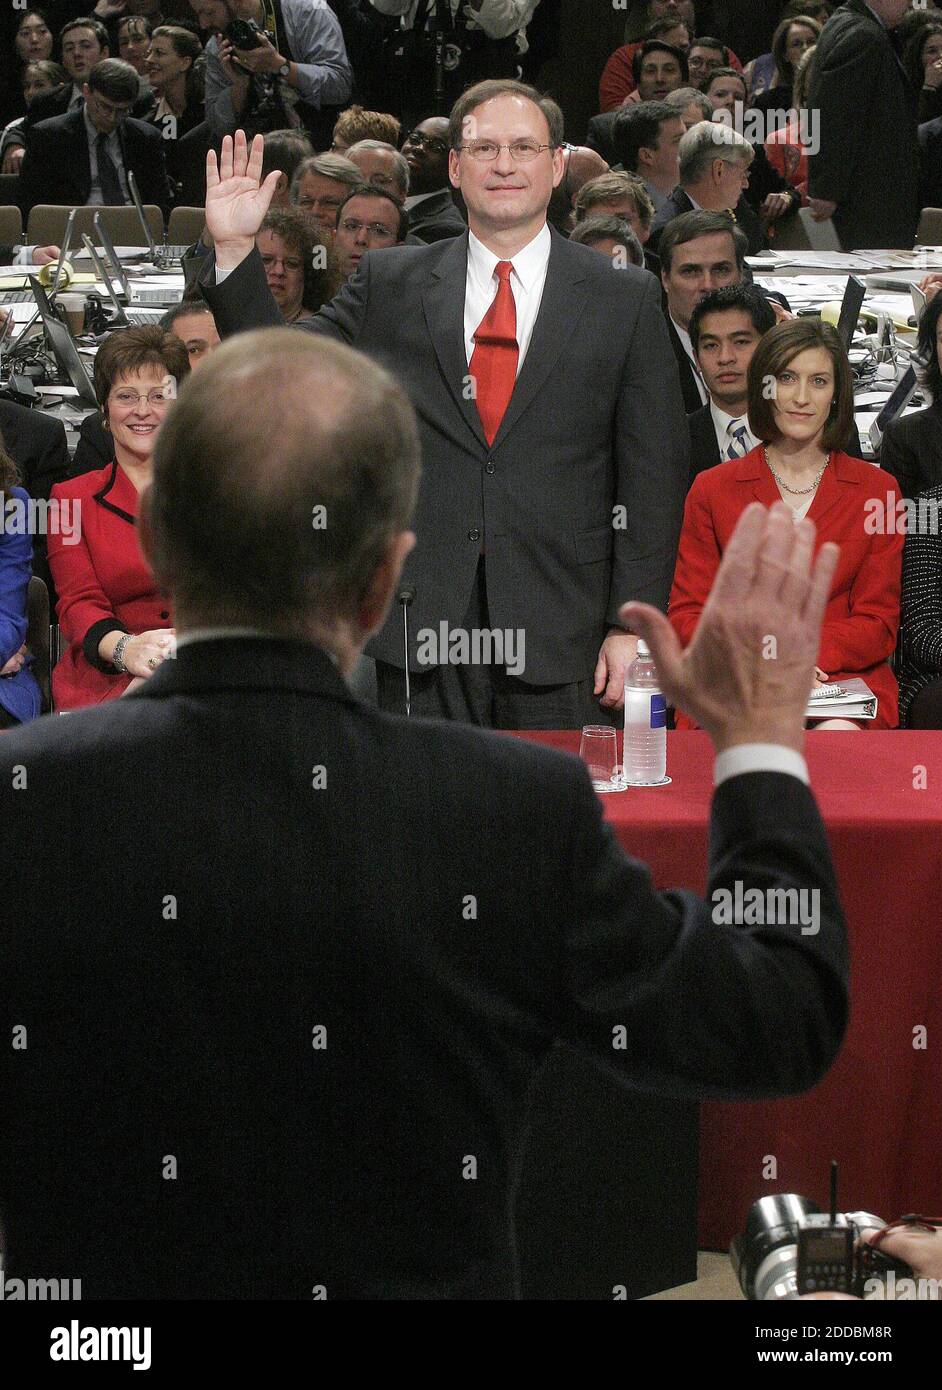 NO FILM, NO VIDEO, NO TV, NO DOCUMENTARY - Samuel Alito, President George W. Bush's nominee for Associate Justice of the Supreme Court, is sworn in before the Senate Judiciary Committee by chairman Arlen Specter (R-PA), foreground, during his confirmation hearing on Monday, January 9, 2006, in Washington, DC, USA. Photo by Chuck Kennedy/KRT/ABACAPRESS.COM Stock Photo